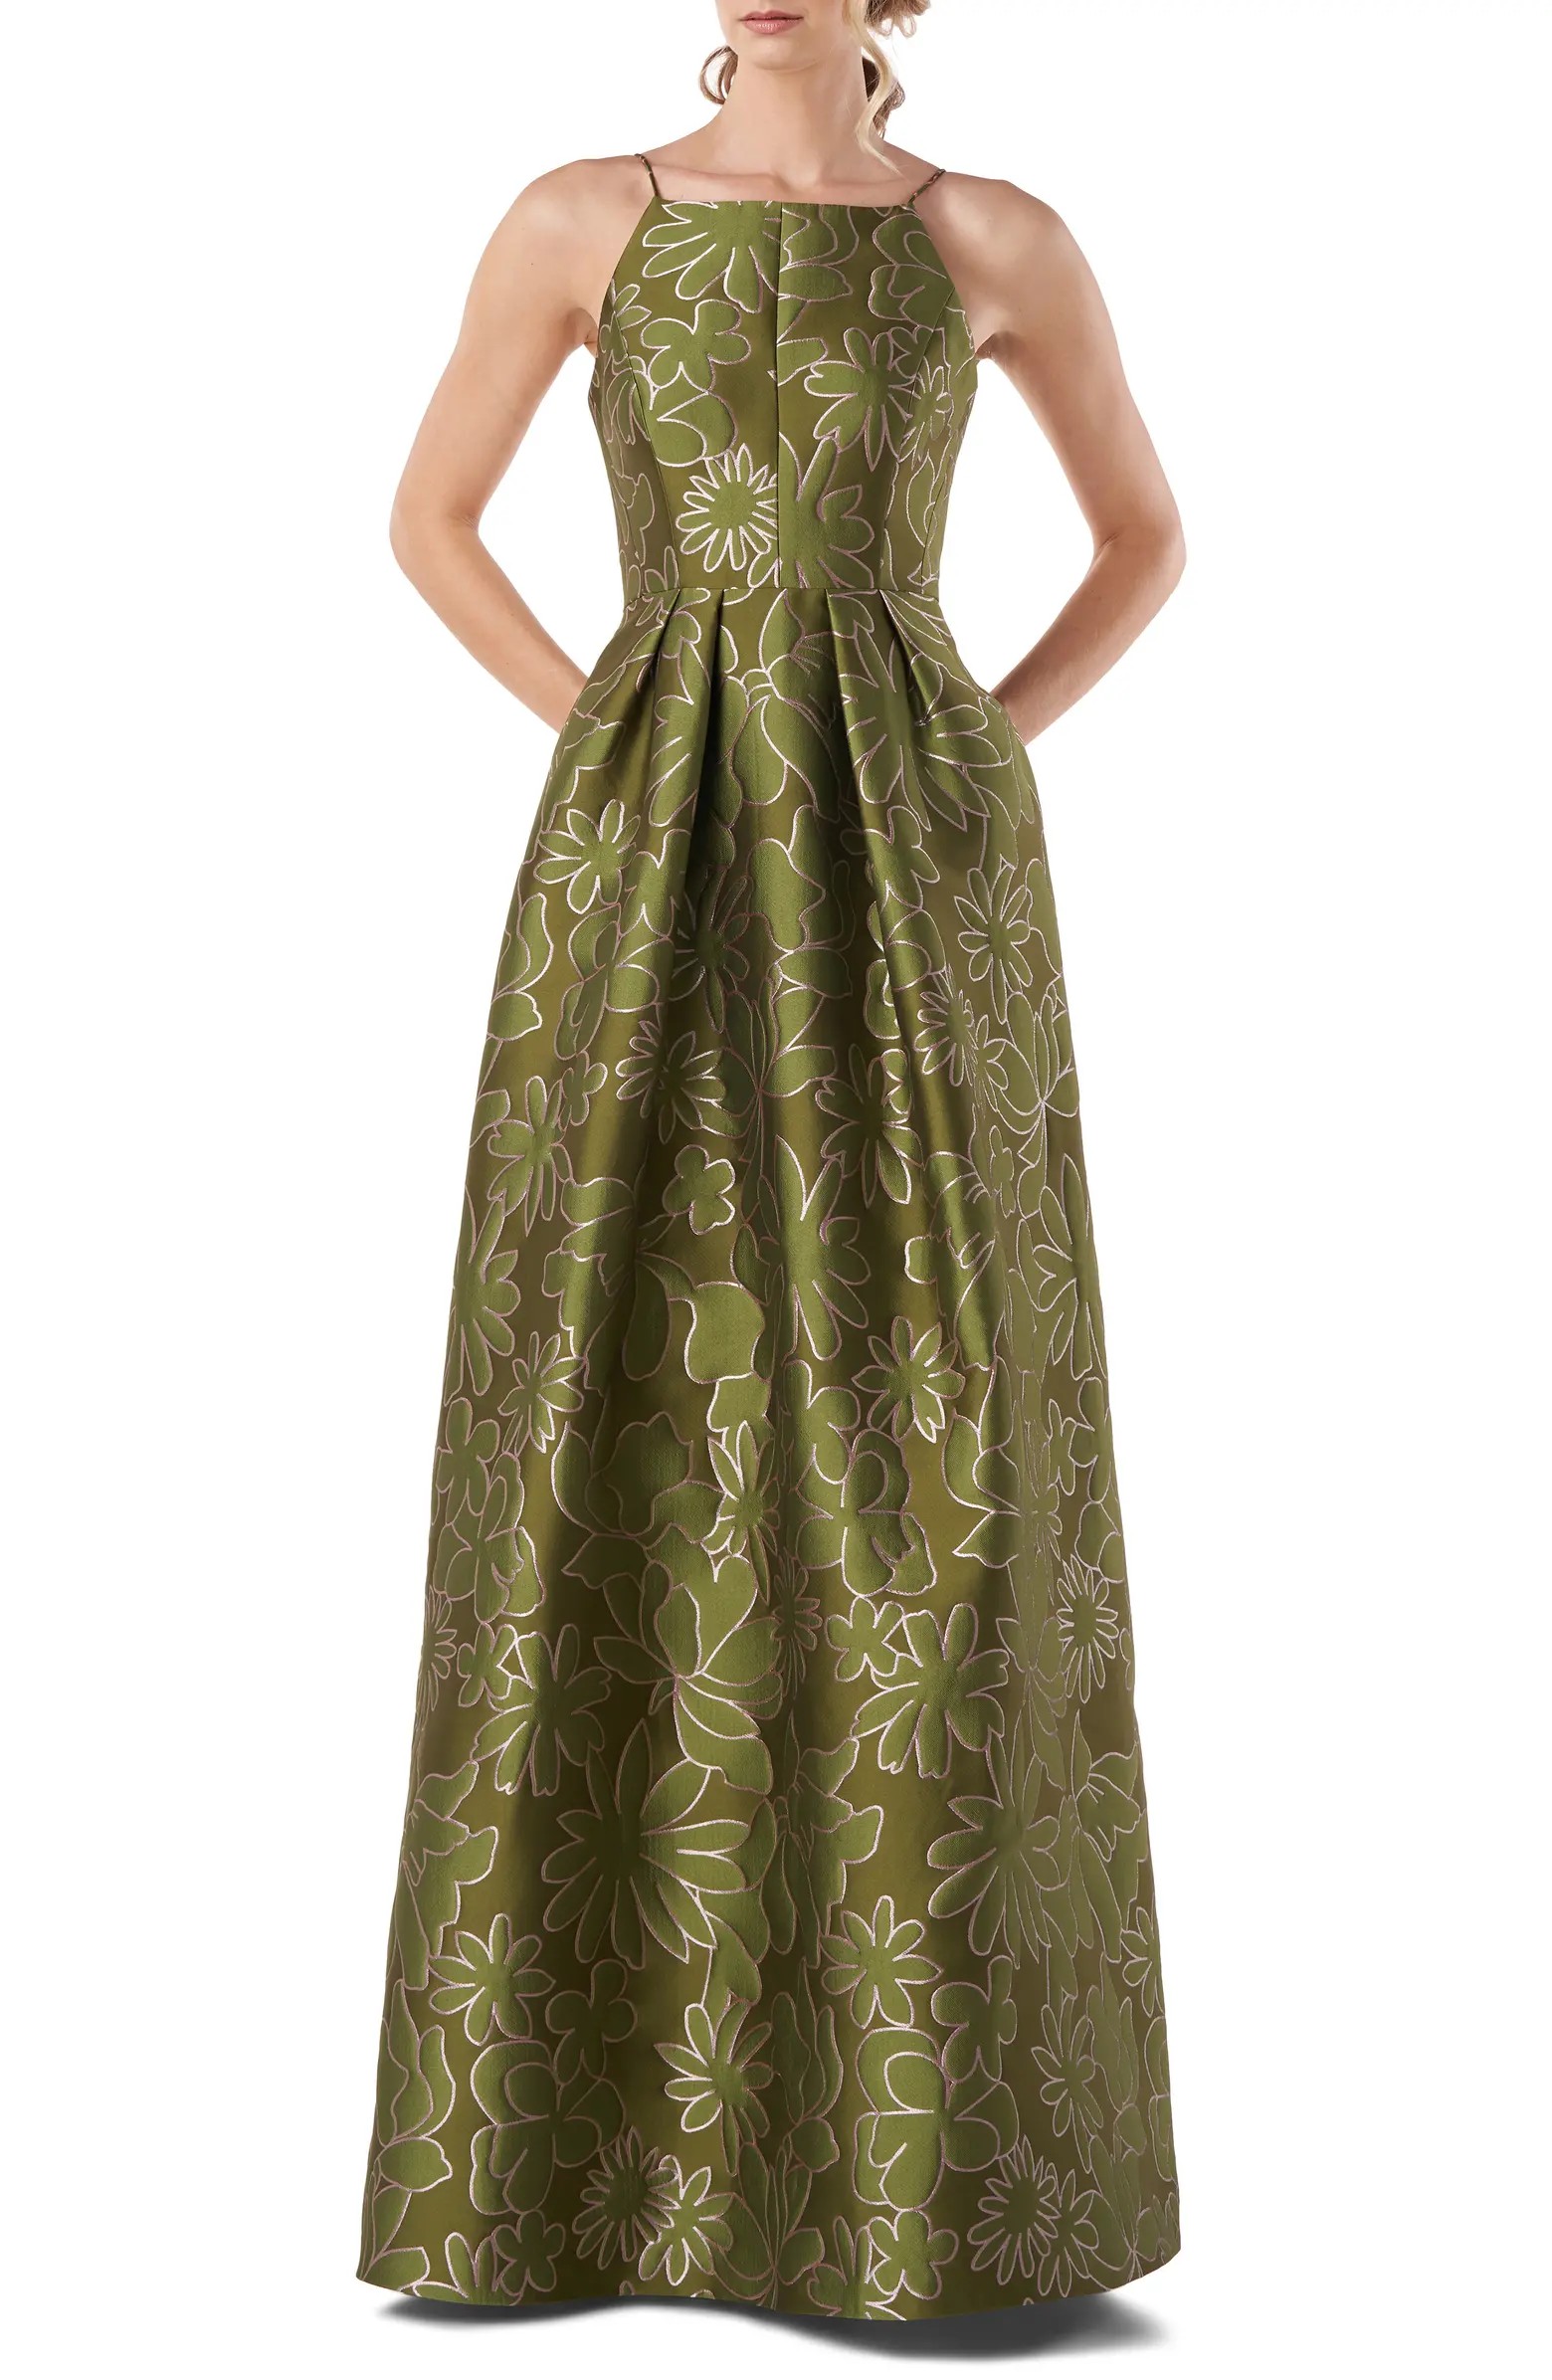 lime green mother of the bride dress